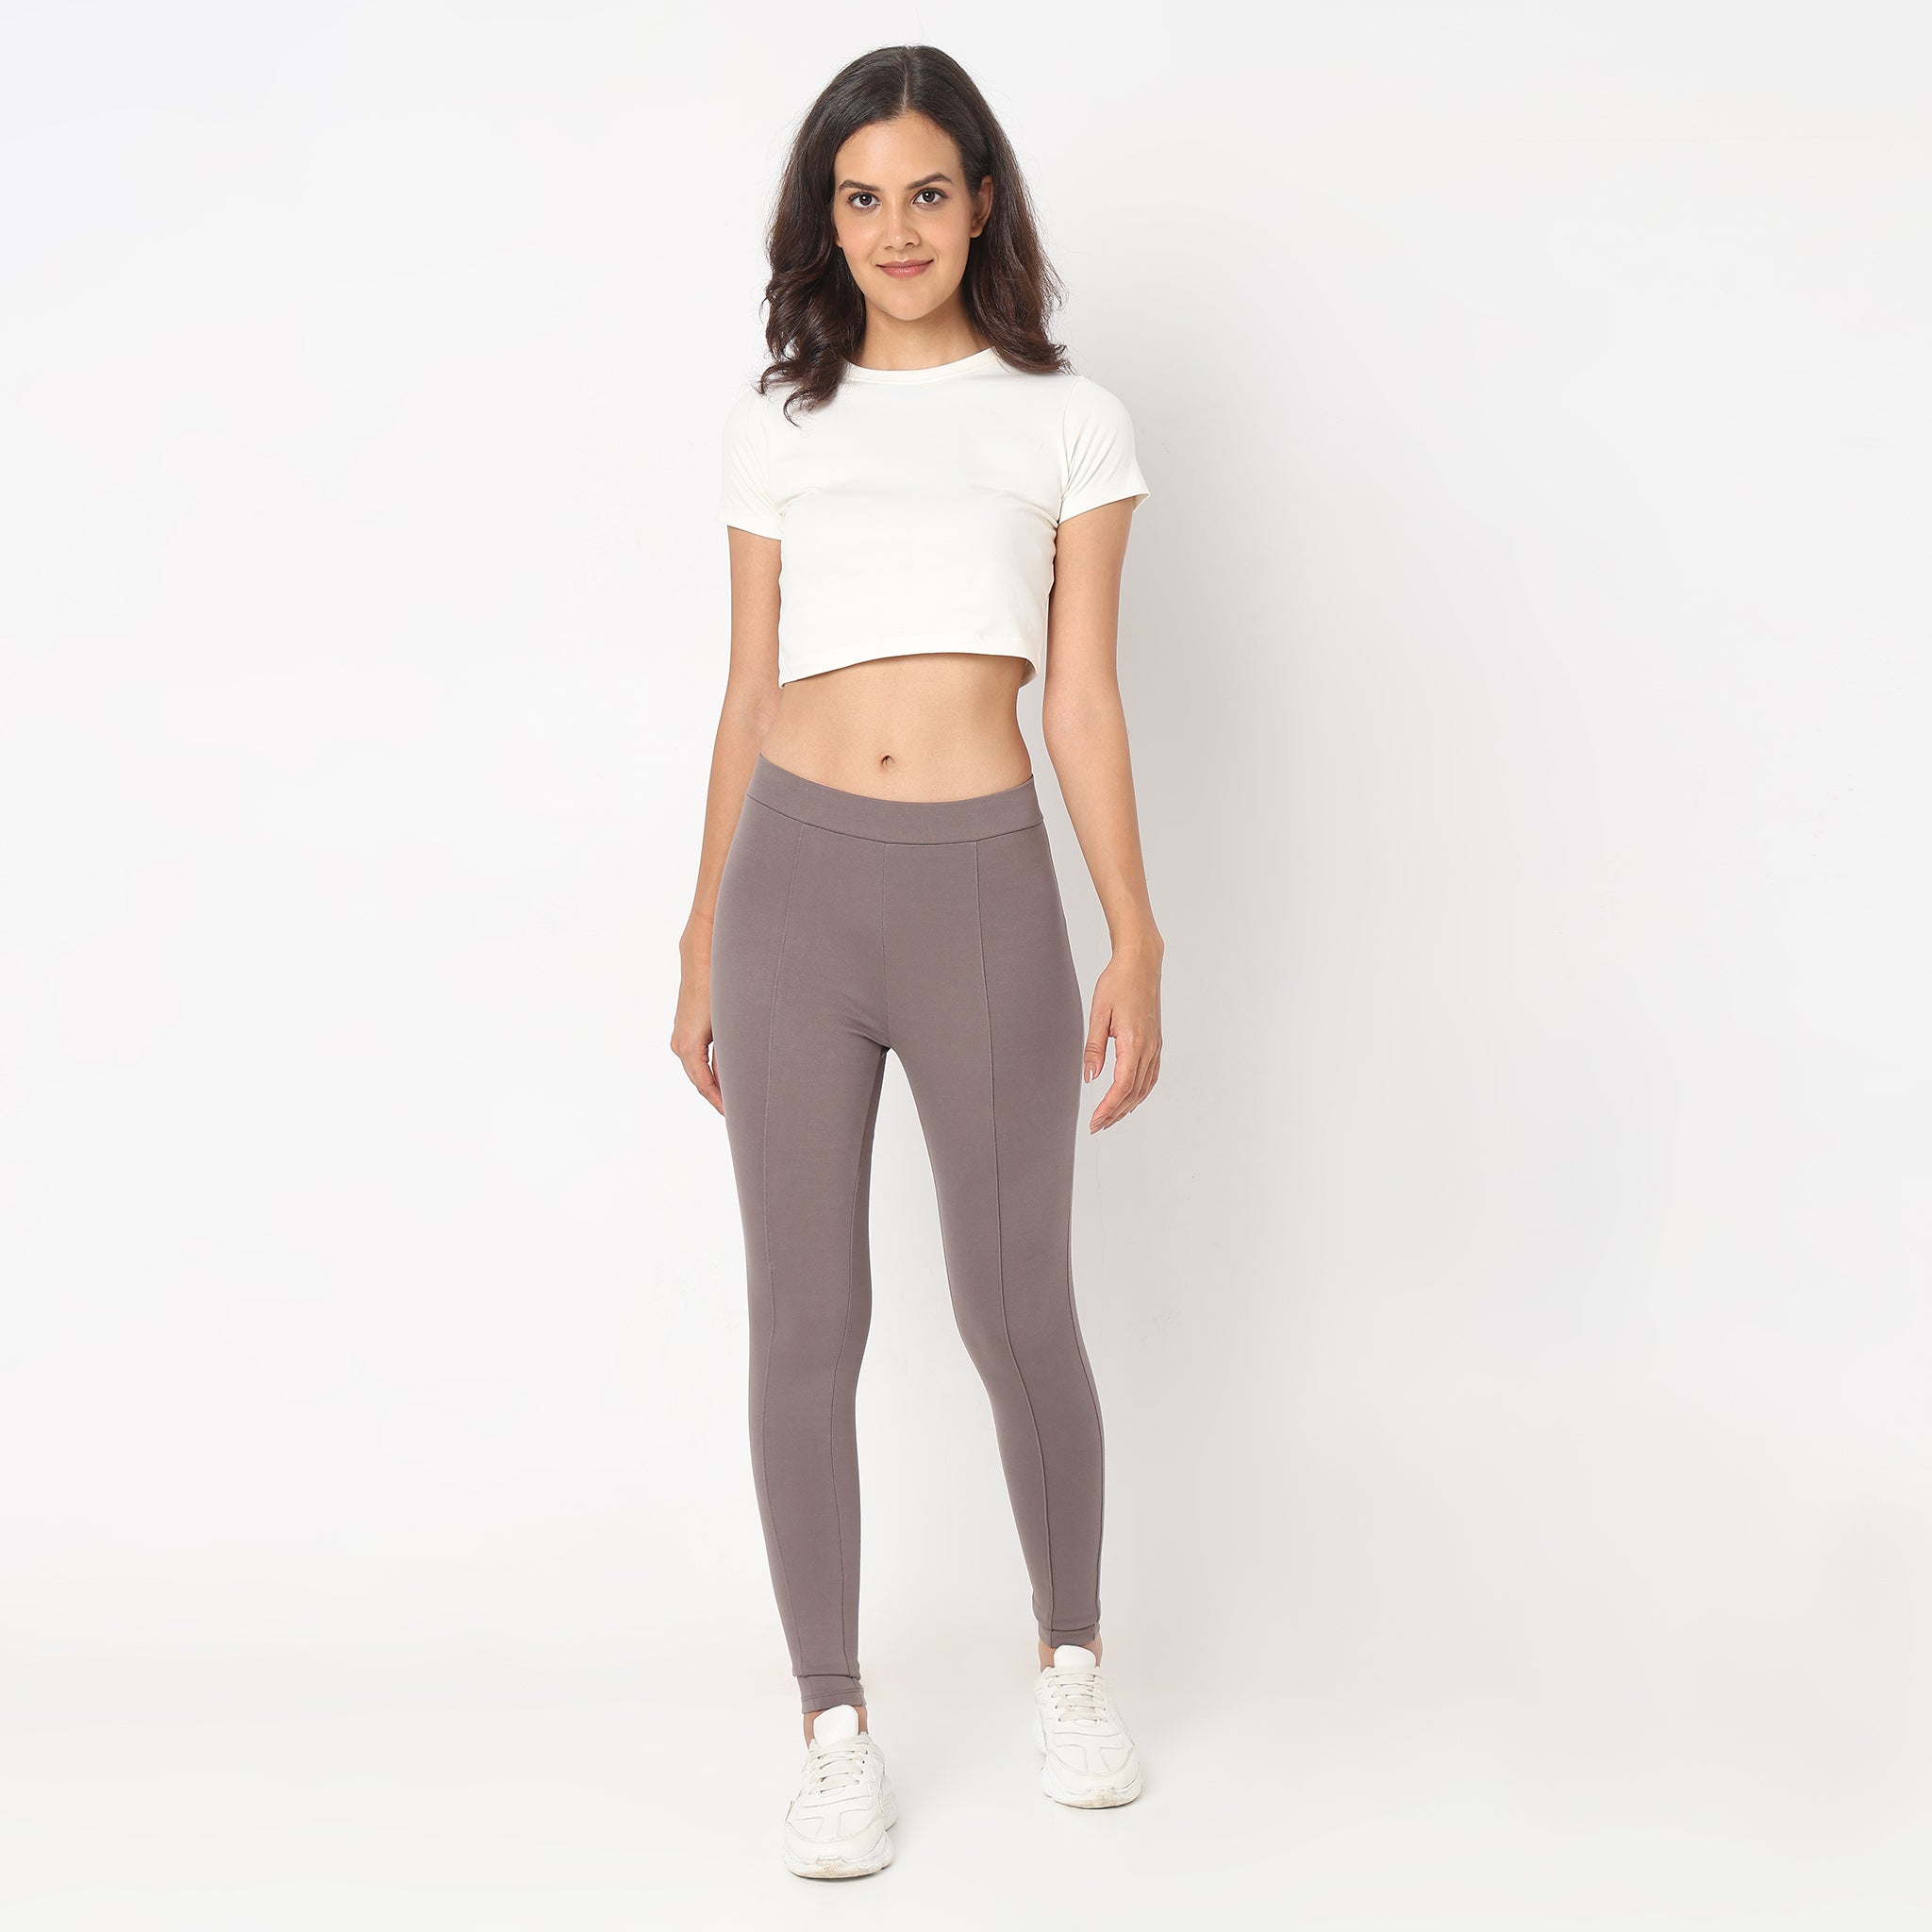 Womens Jeans|Buy Jeggings for Women at great Prices |Redtape